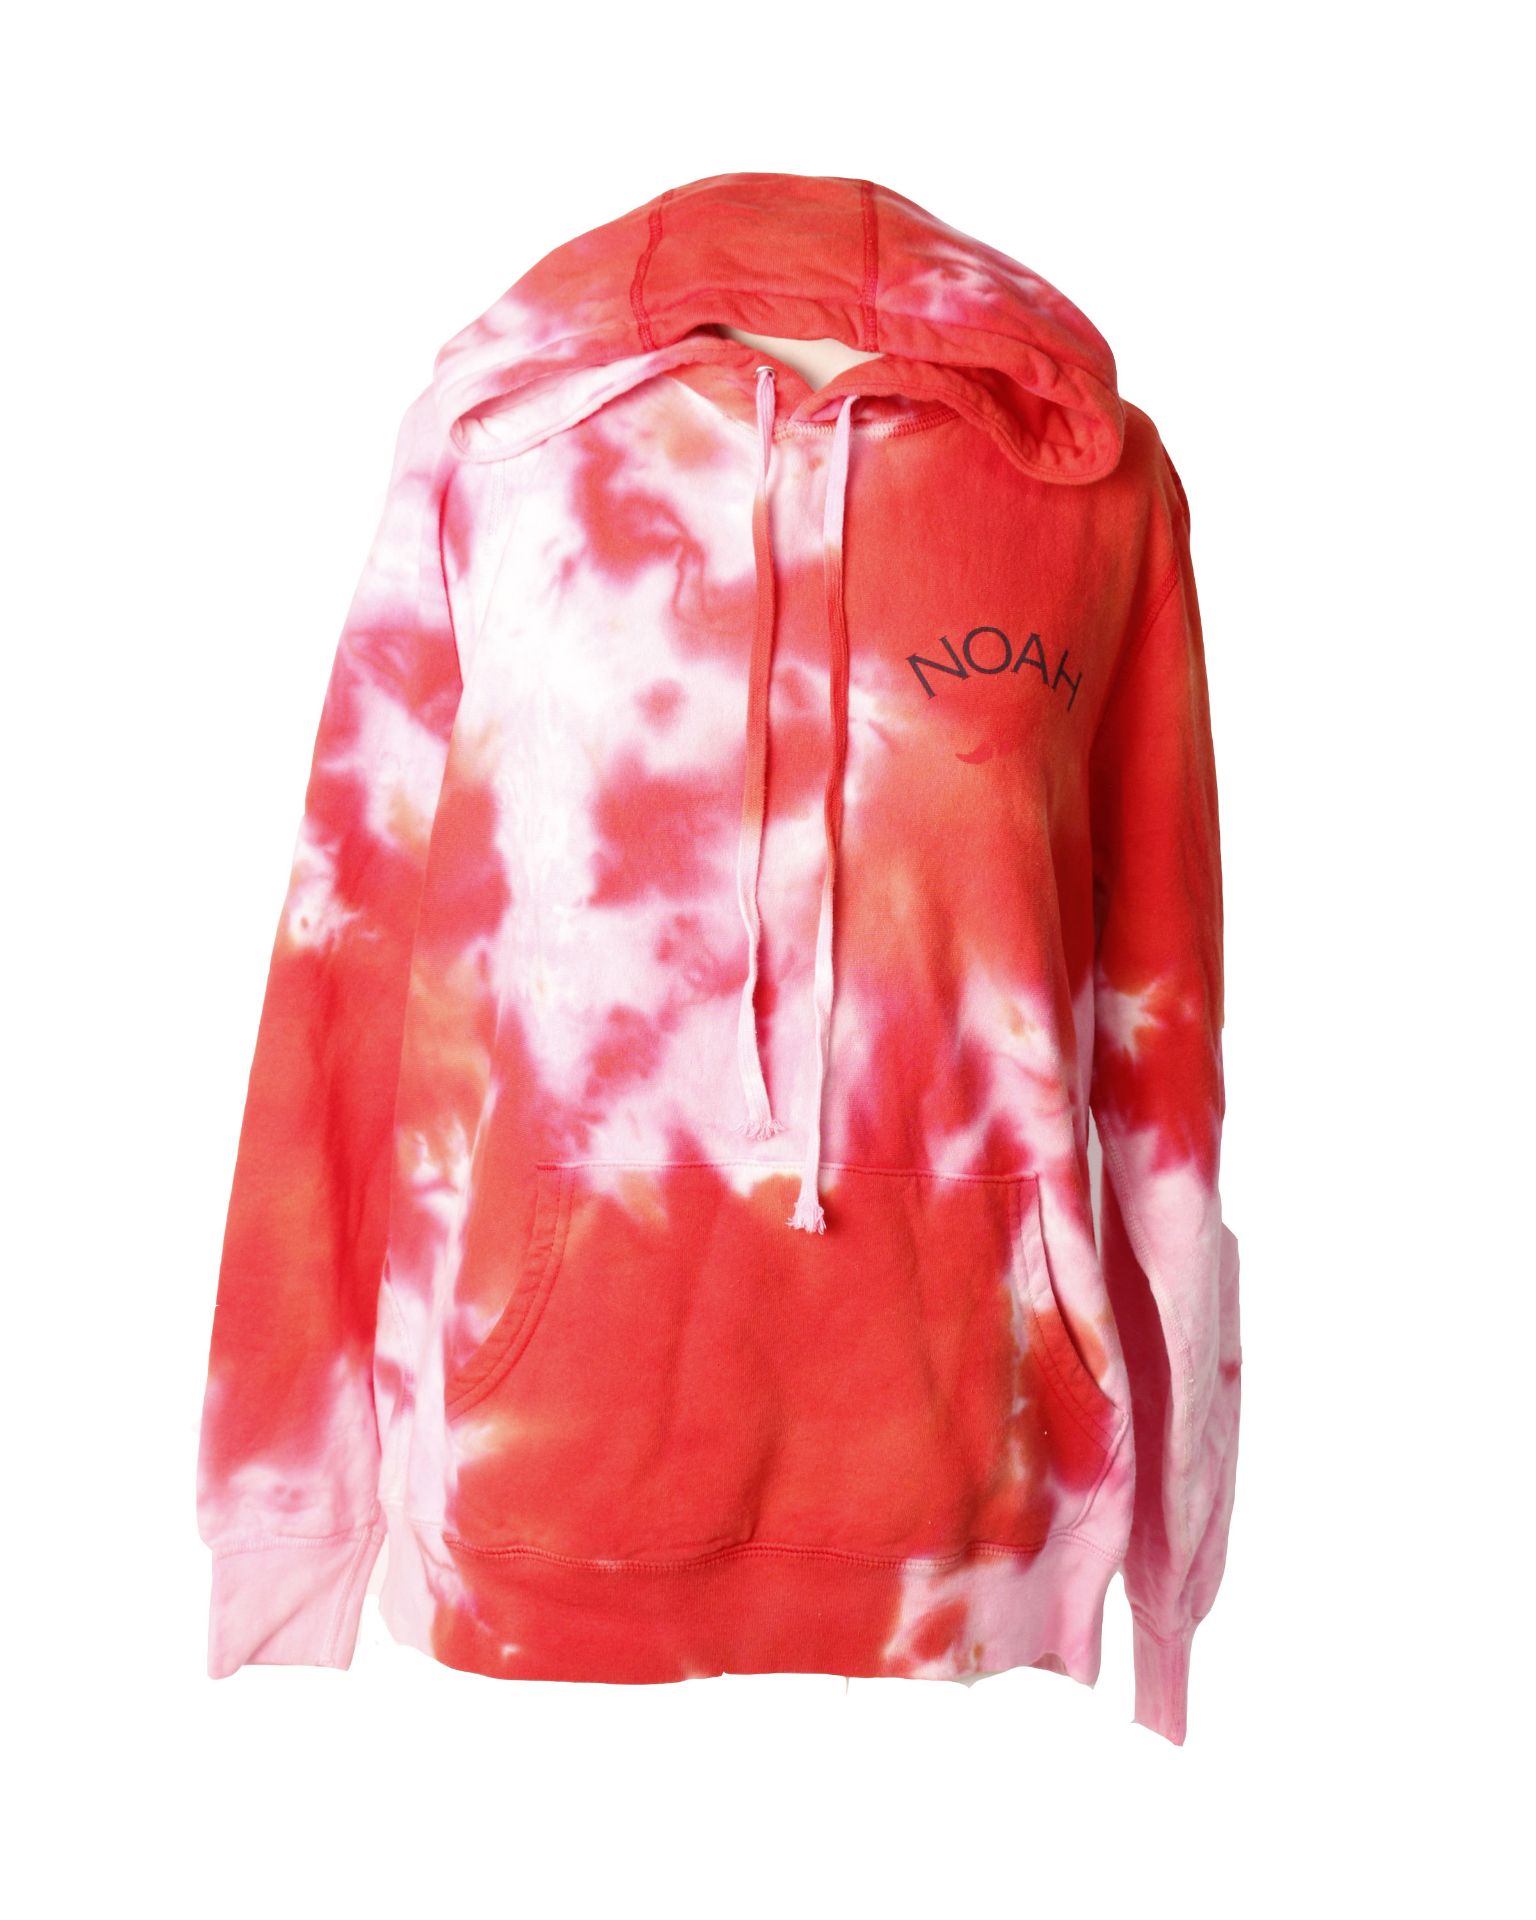 One as new Noah Sun Dyed Winged Foot hoodie in red (L). - Image 2 of 3